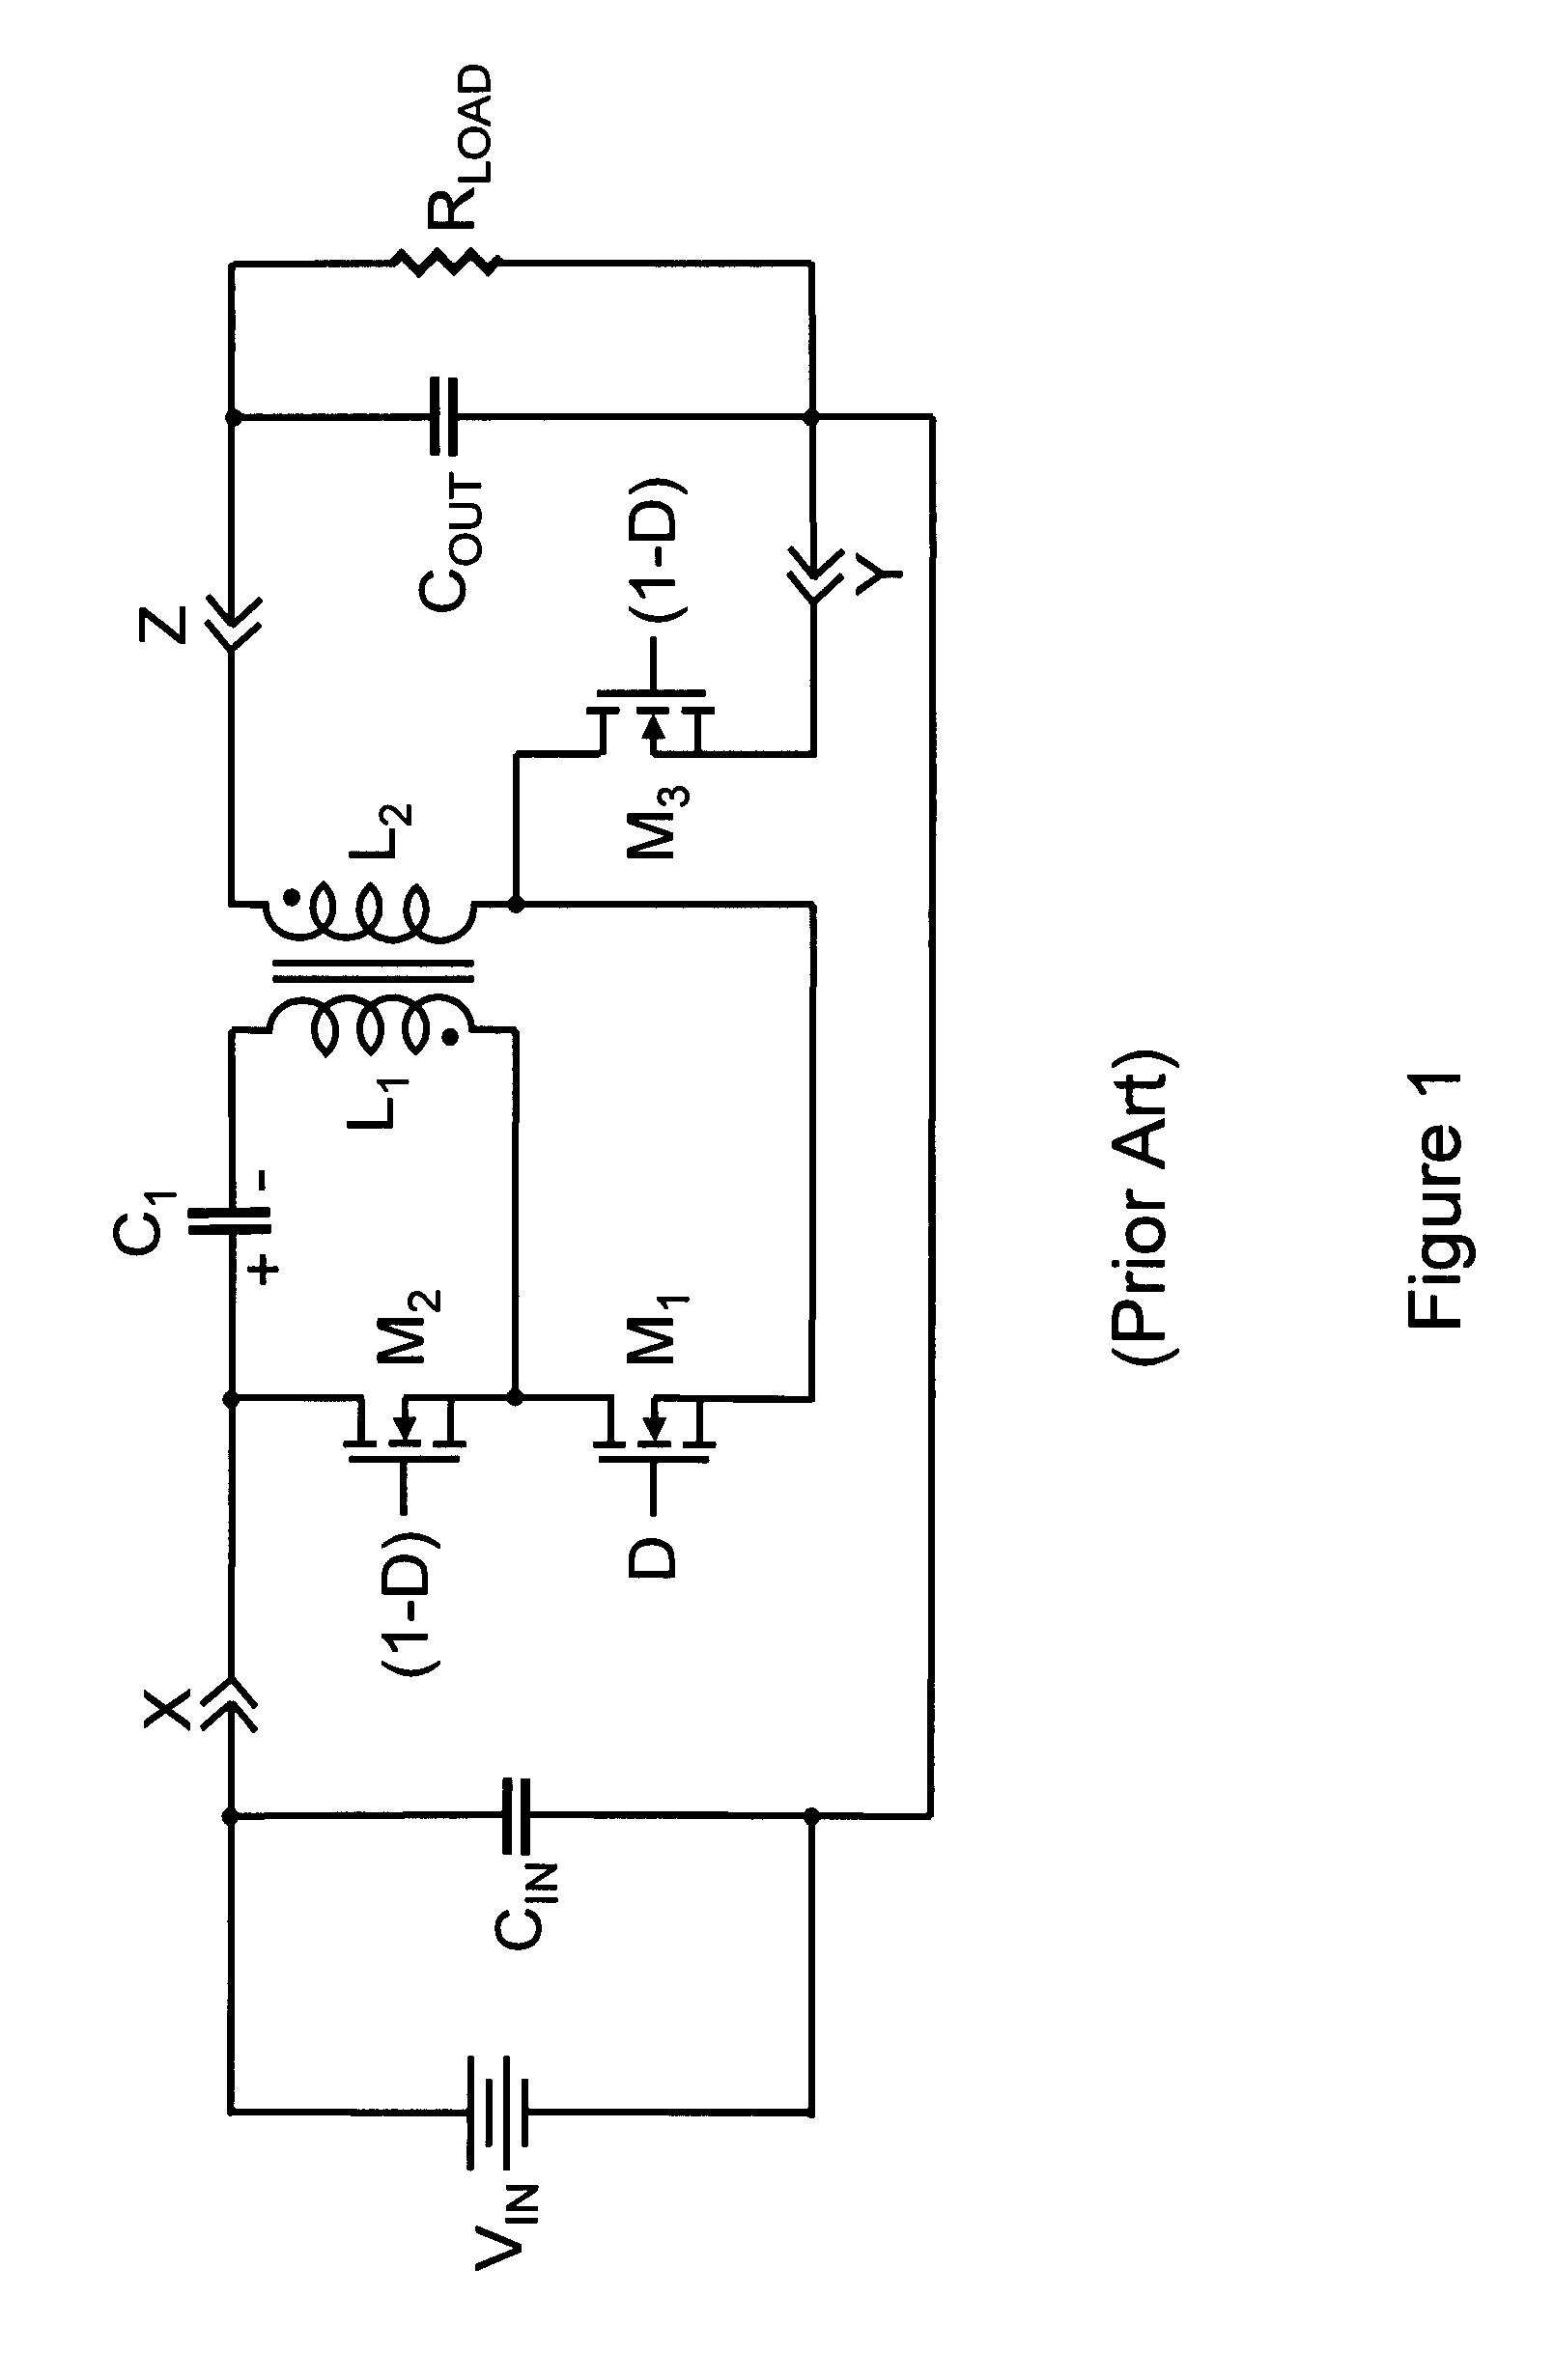 Self limiting zero voltage switching power conversion networks